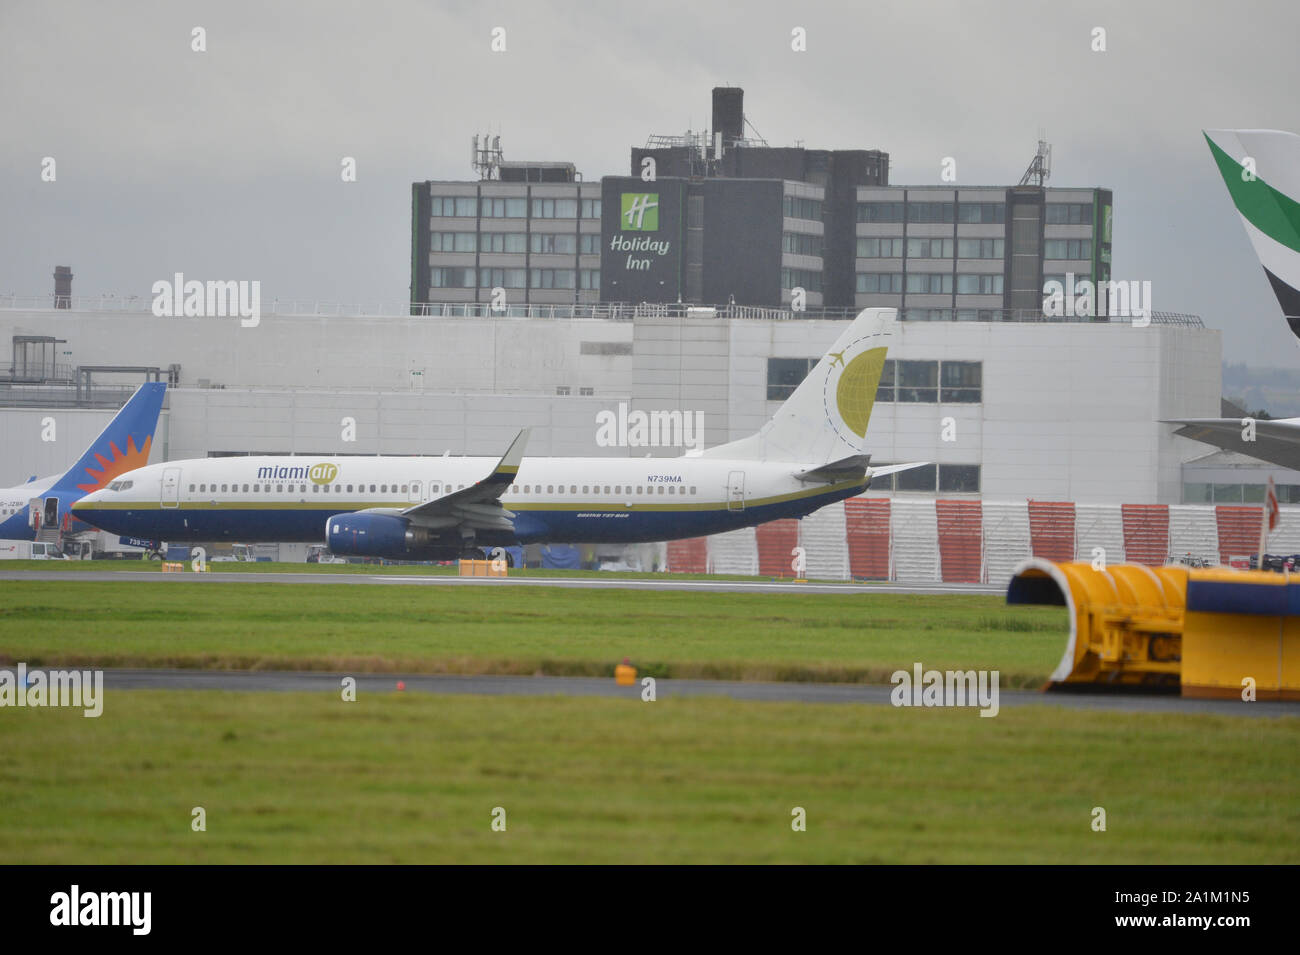 Glasgow, UK. 27th Sep, 2019. Following the immediate fallout from the collapsed tour company Thomas Cook, Operation Matterhorn is still in full flight at Glasgow Airport. Miami Air Boeing 737-800 aircraft seen taking stranded passengers back from Spain and mainland Europe. Note: This aircraft was also used previously by the United States Government for transporting prisoners to and from the infamous Guantanamo Bay. Credit: Colin Fisher/Alamy Live News Credit: Colin Fisher/Alamy Live News Stock Photo